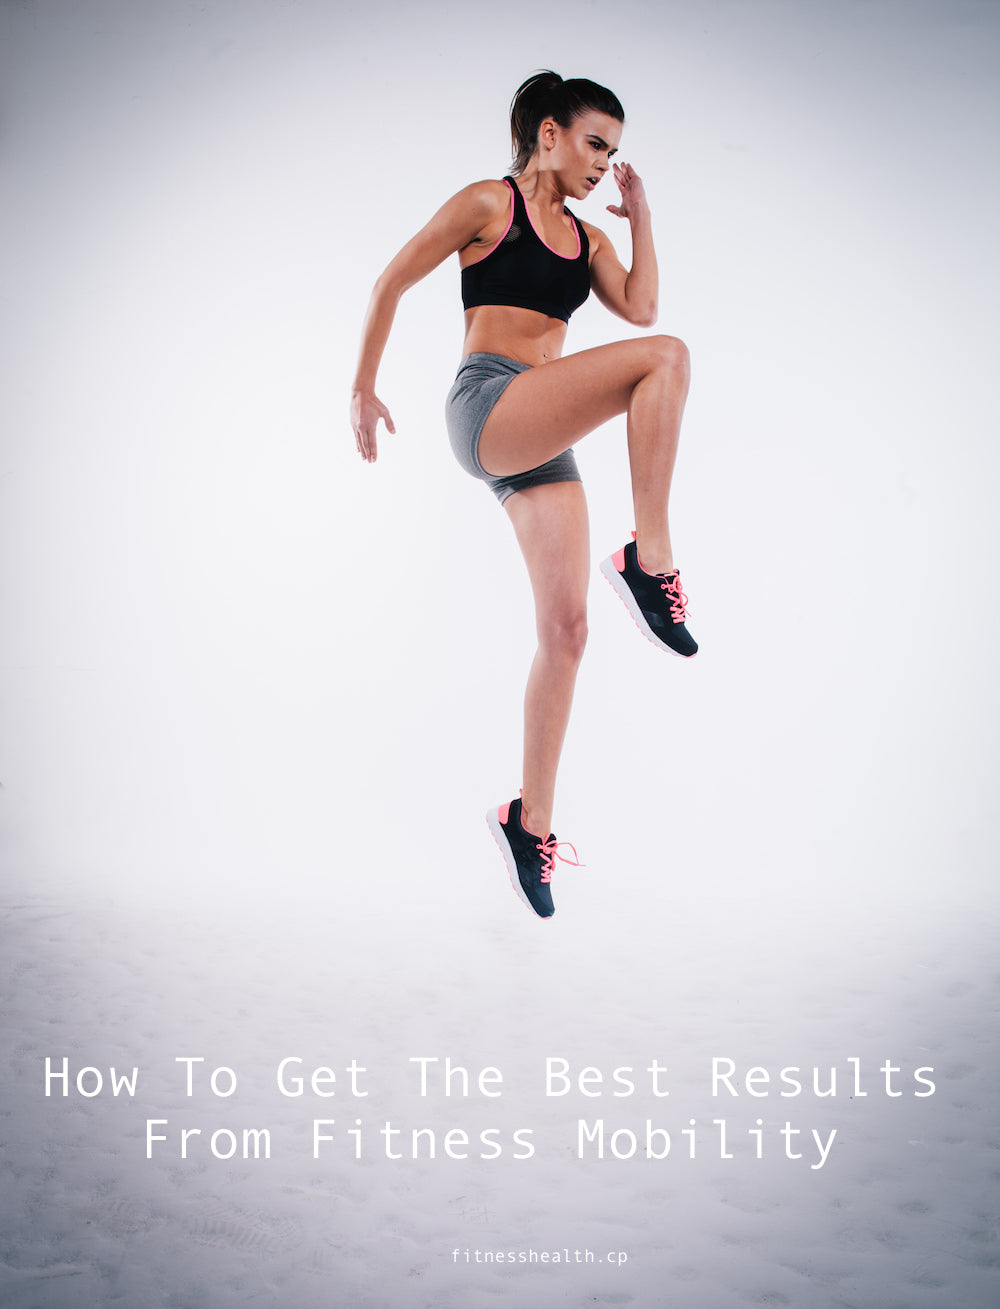 How To Get The Best Results From Fitness Mobility - Fitness Health 